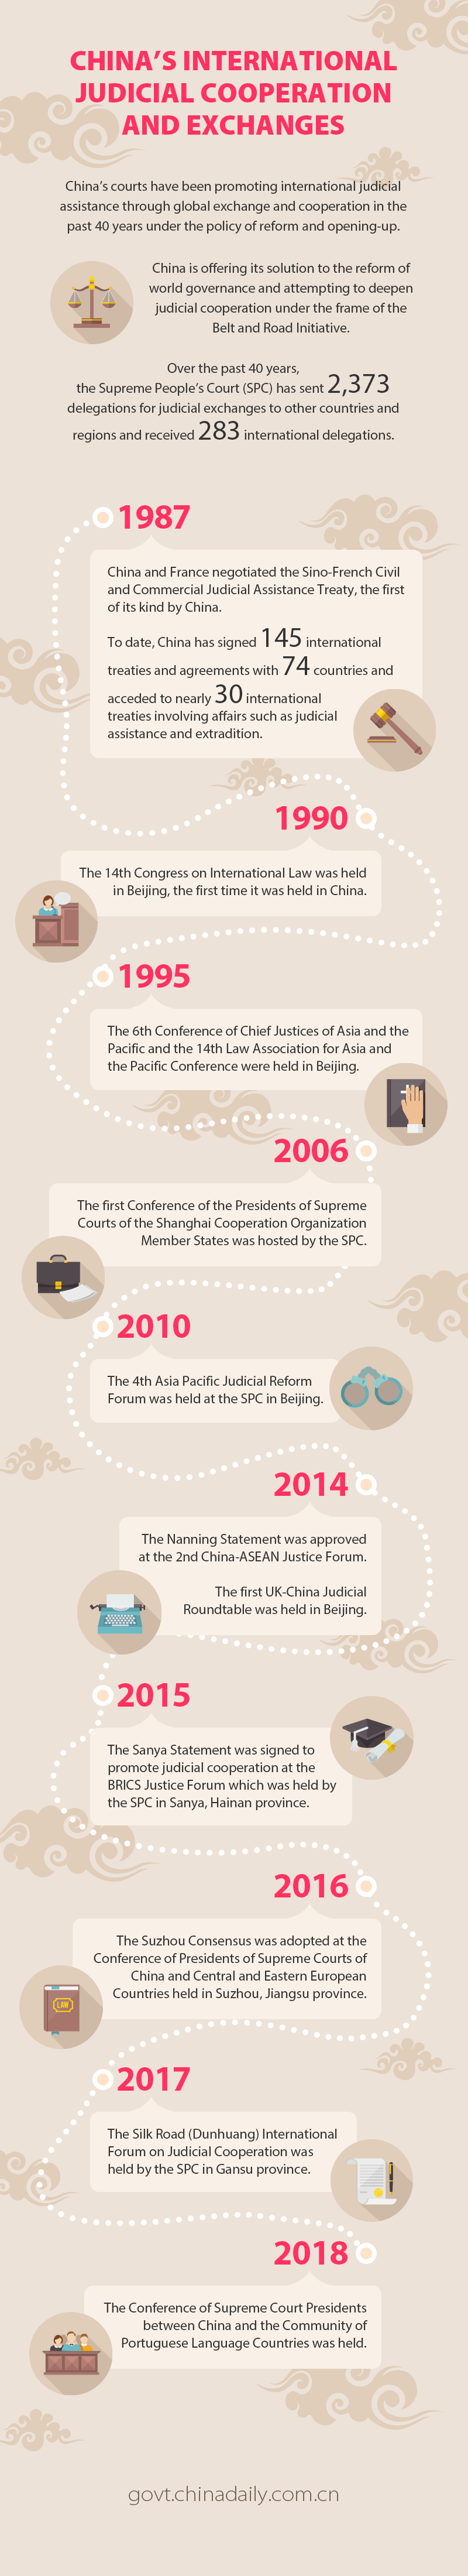 China’s international judicial cooperation and exchanges